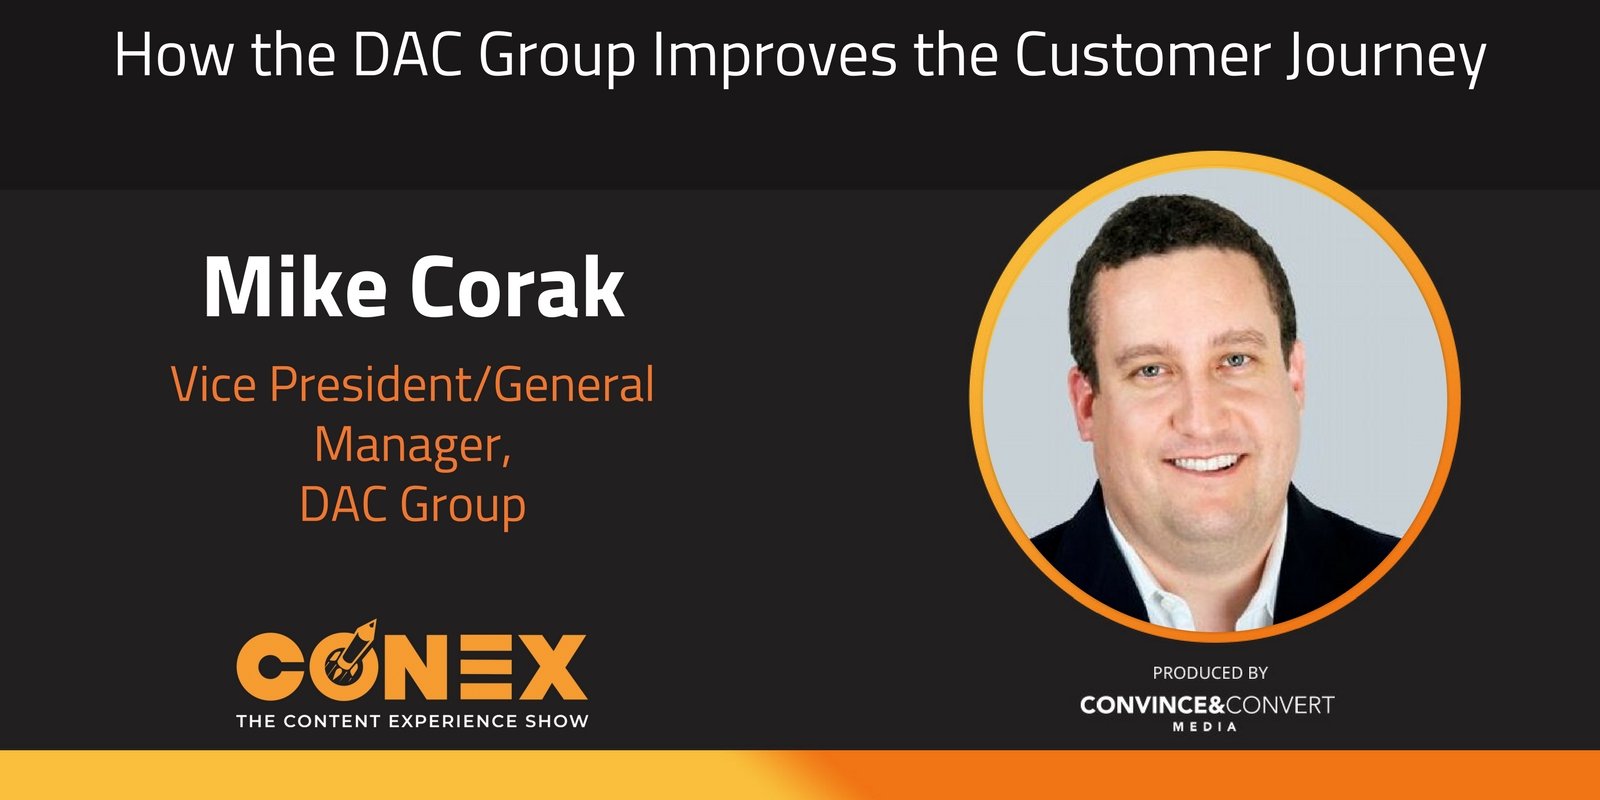 How the DAC Group Improves the Customer Journey